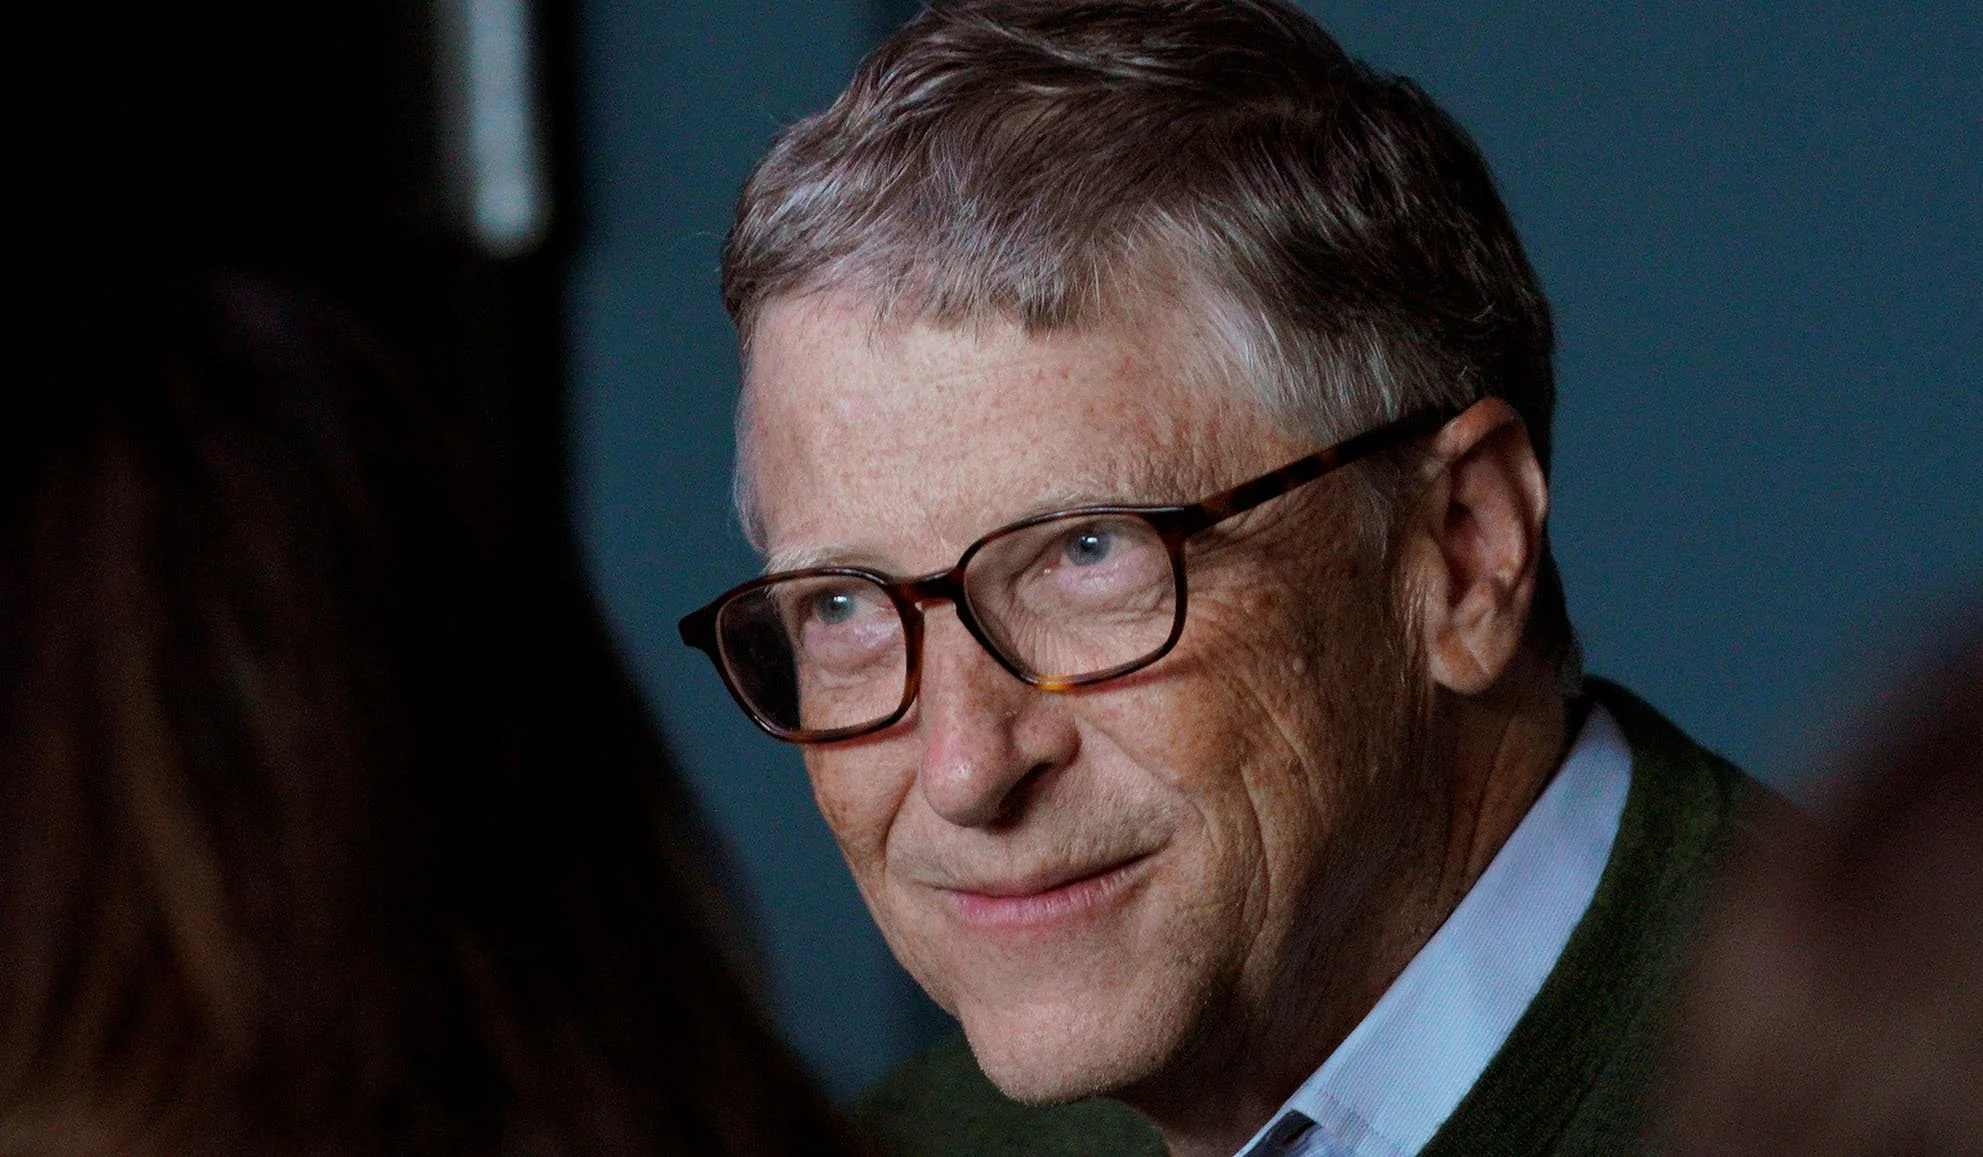 After Becoming a Father, Bill Gates’s Views on Work and Vacation Changed